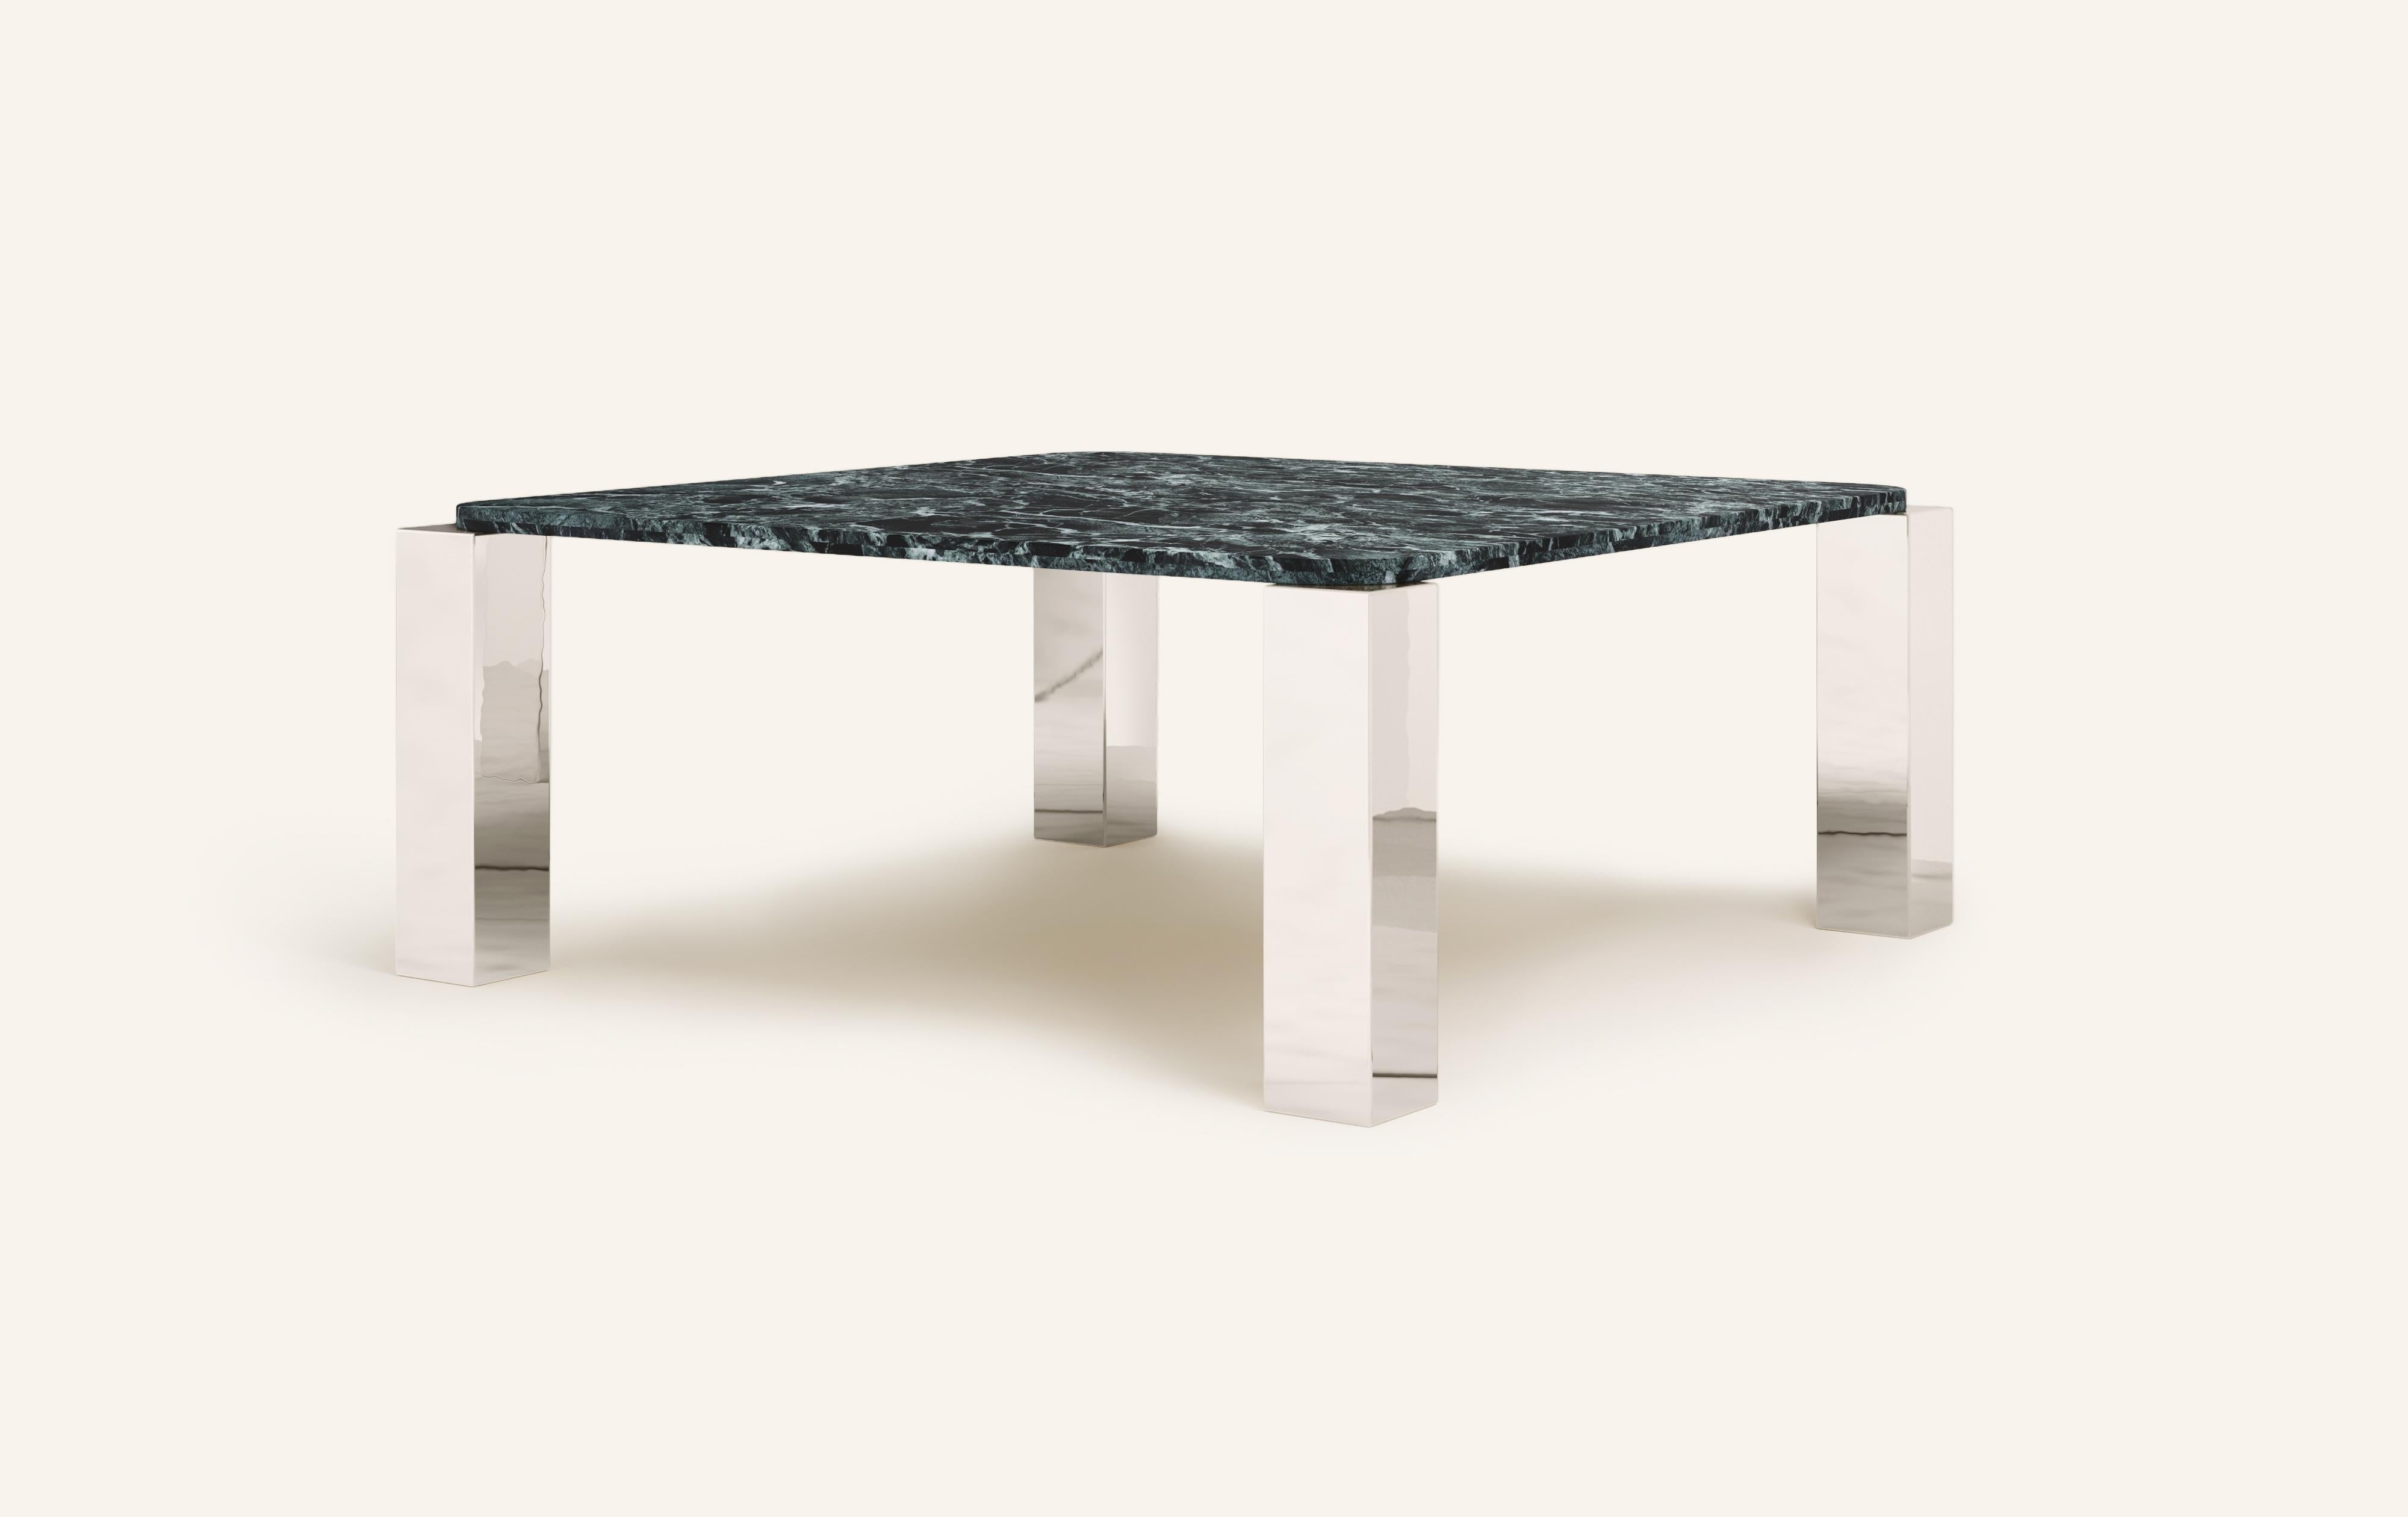 Organic Modern FORM(LA) Cubo Square Dining Table 74”L x 74”W x 30”H Verde Alpi Marble & Chrome For Sale